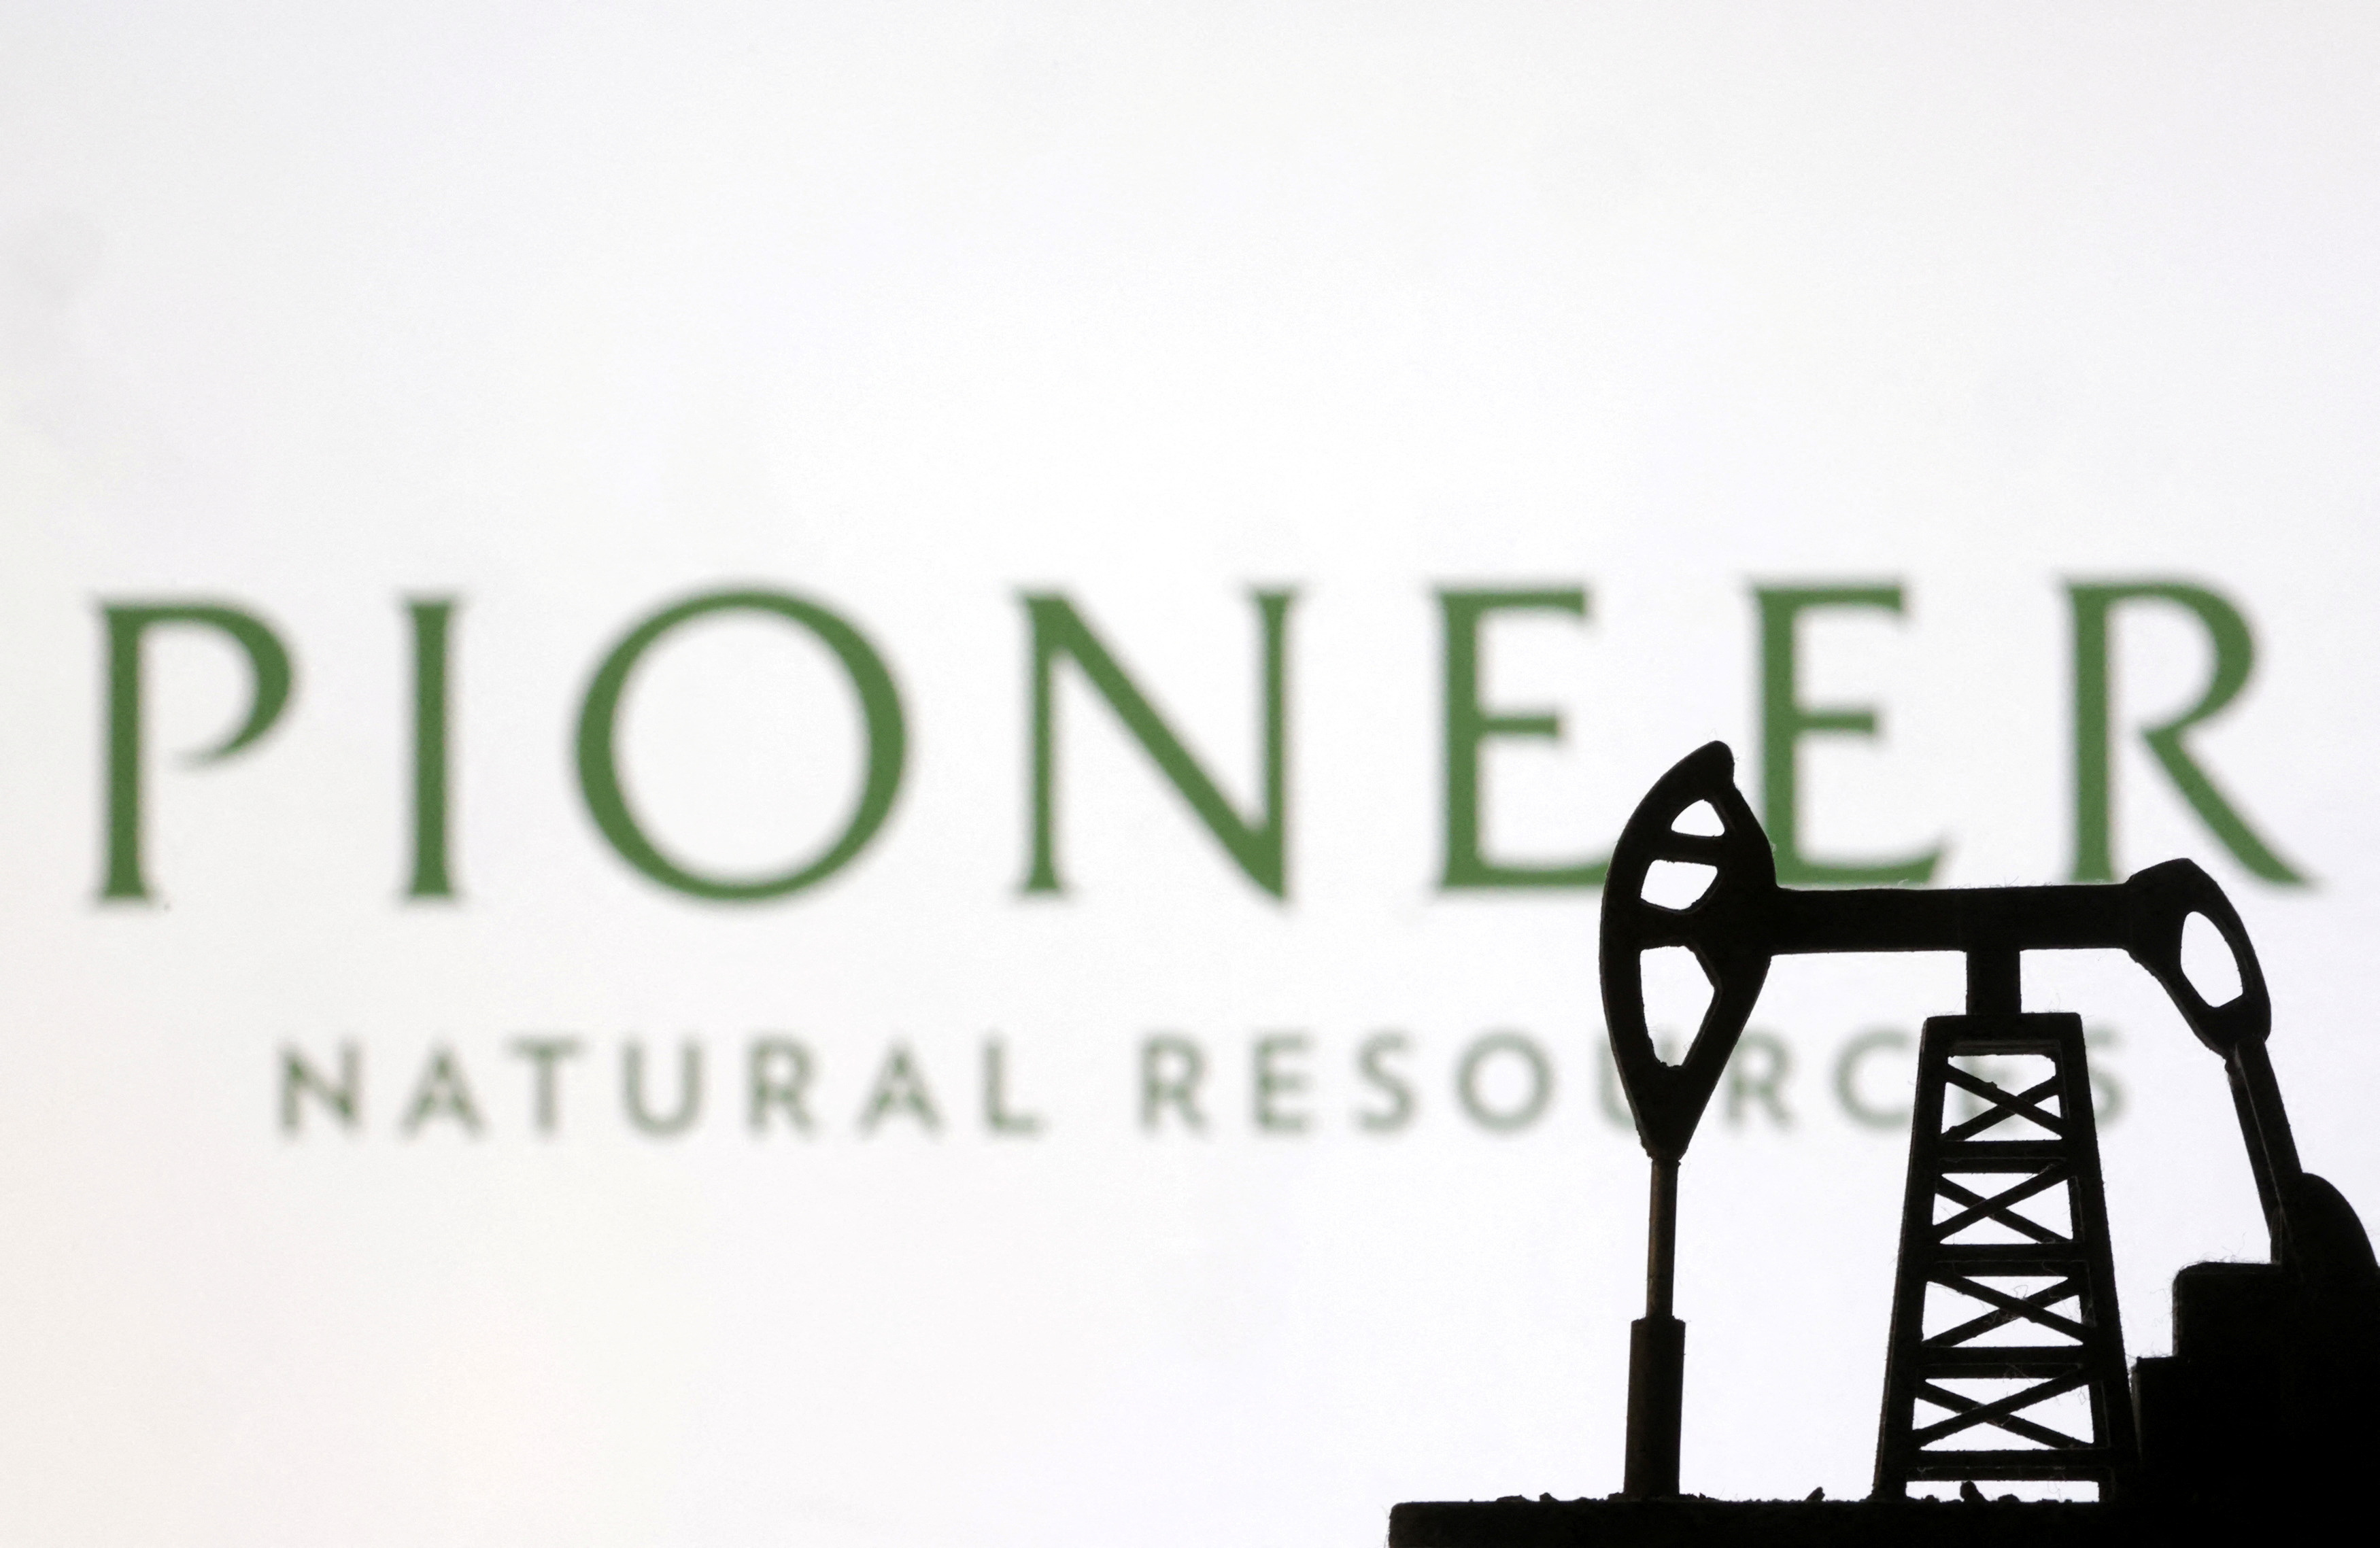 The illustration shows the Pioneer Natural Resources logo